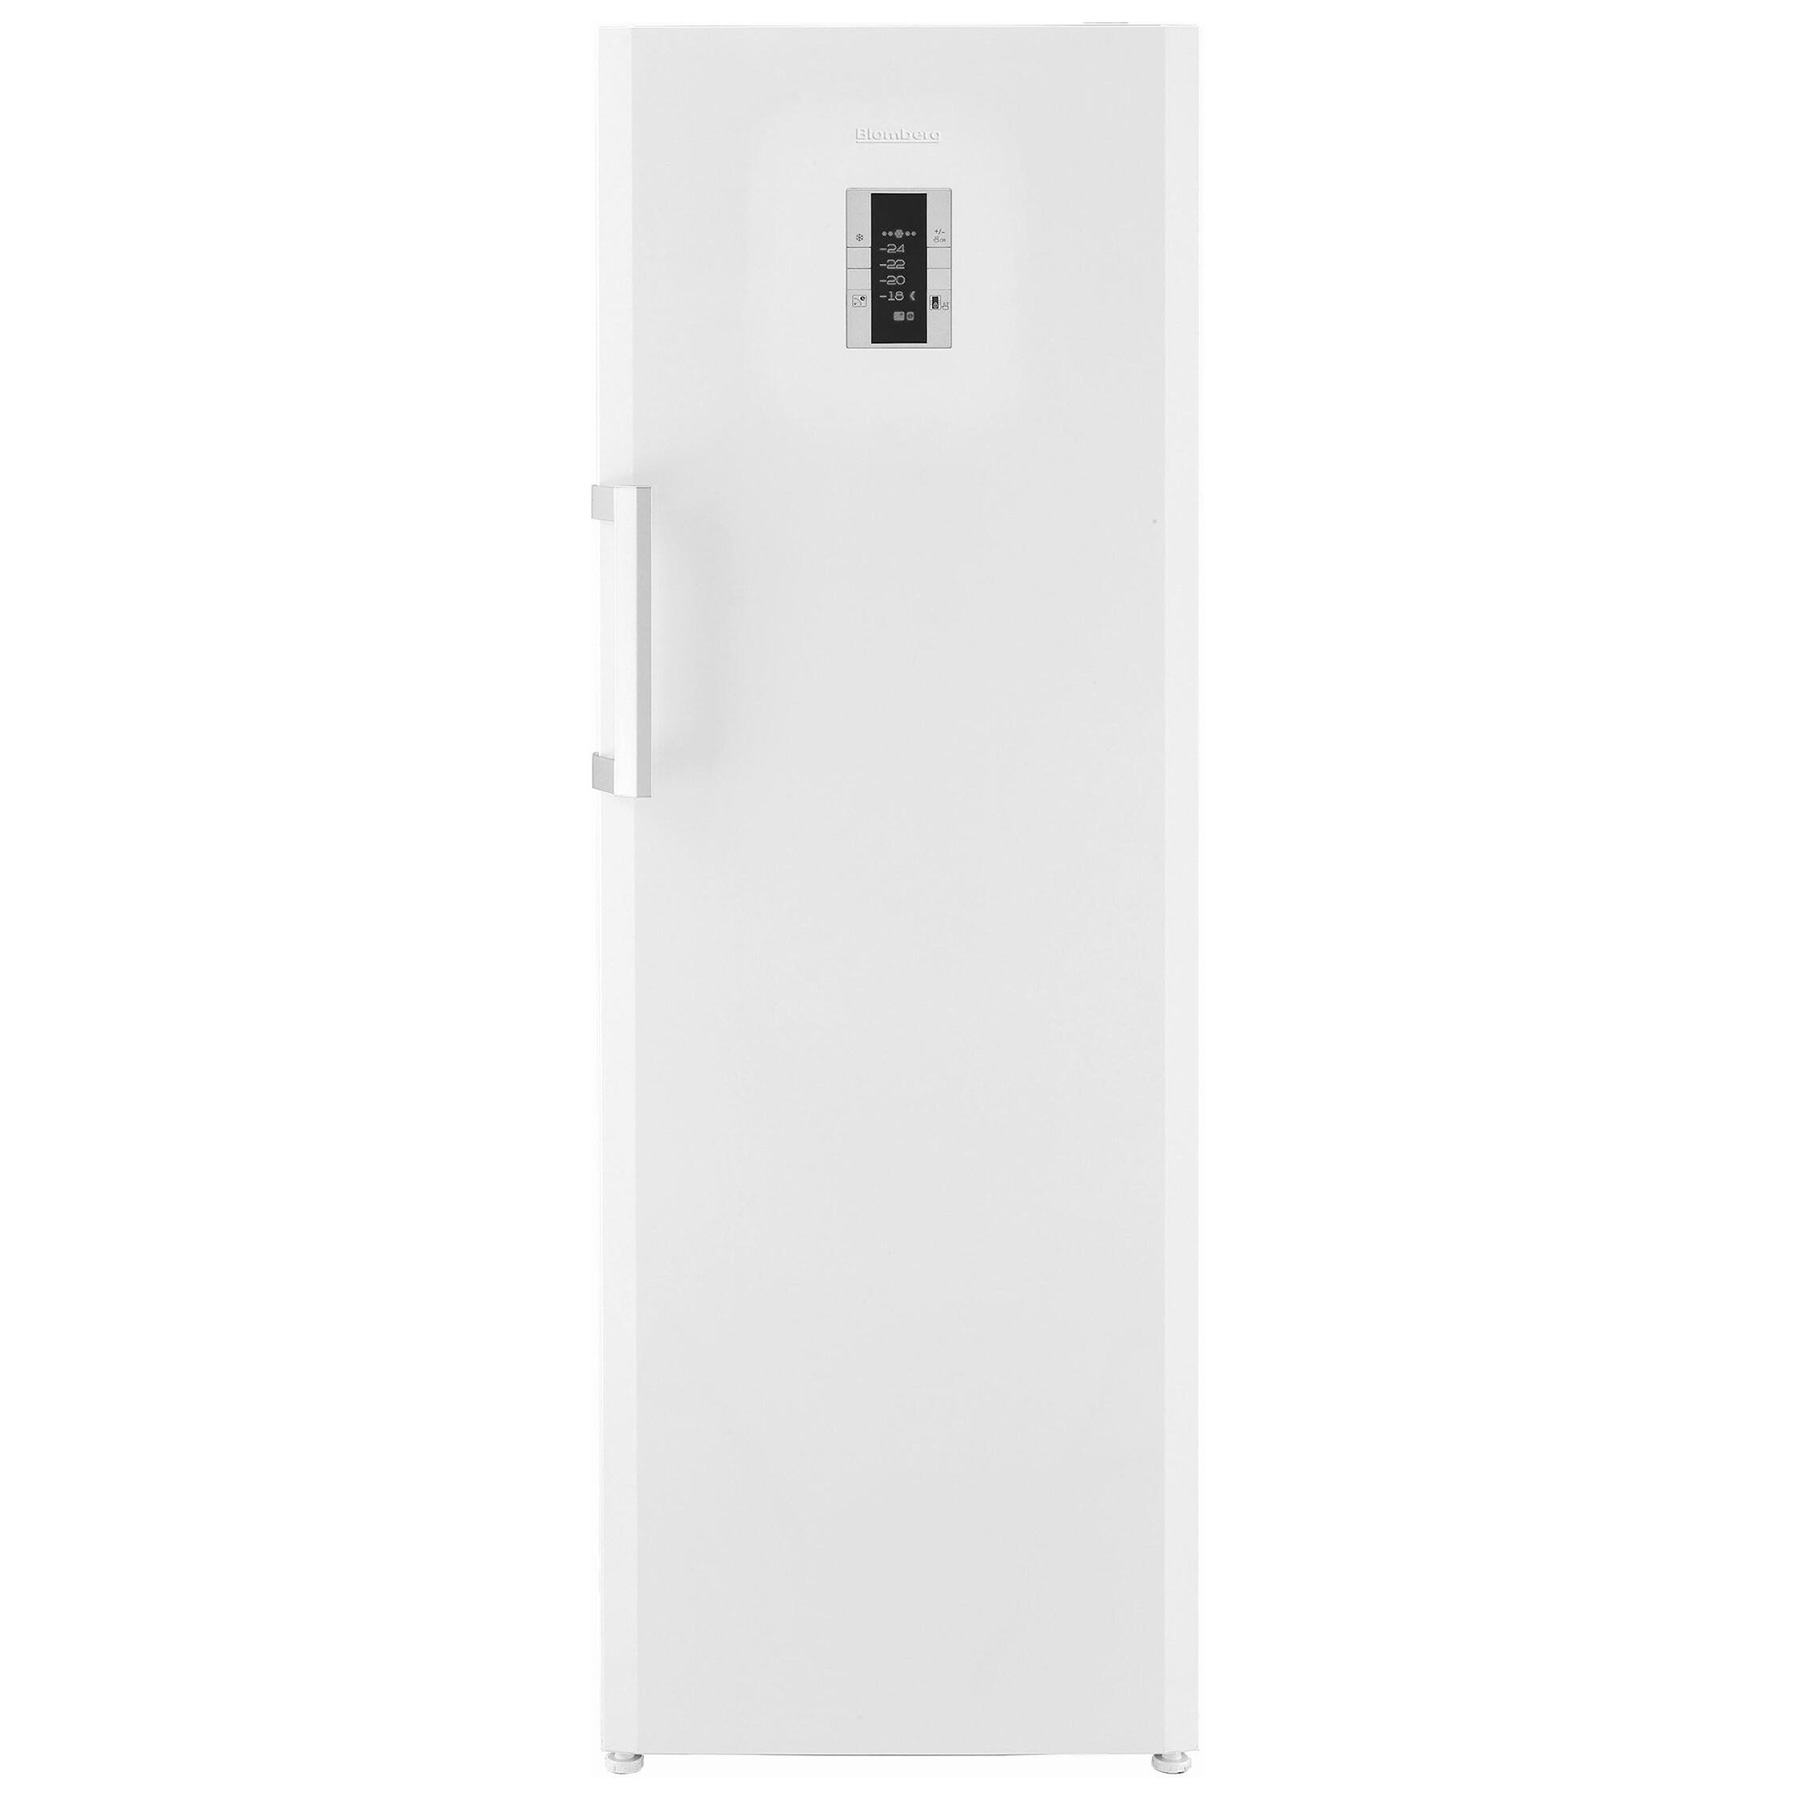 Image of Blomberg FNT9673P 60cm Tall Frost Free Freezer White 1 71m F Rated 255